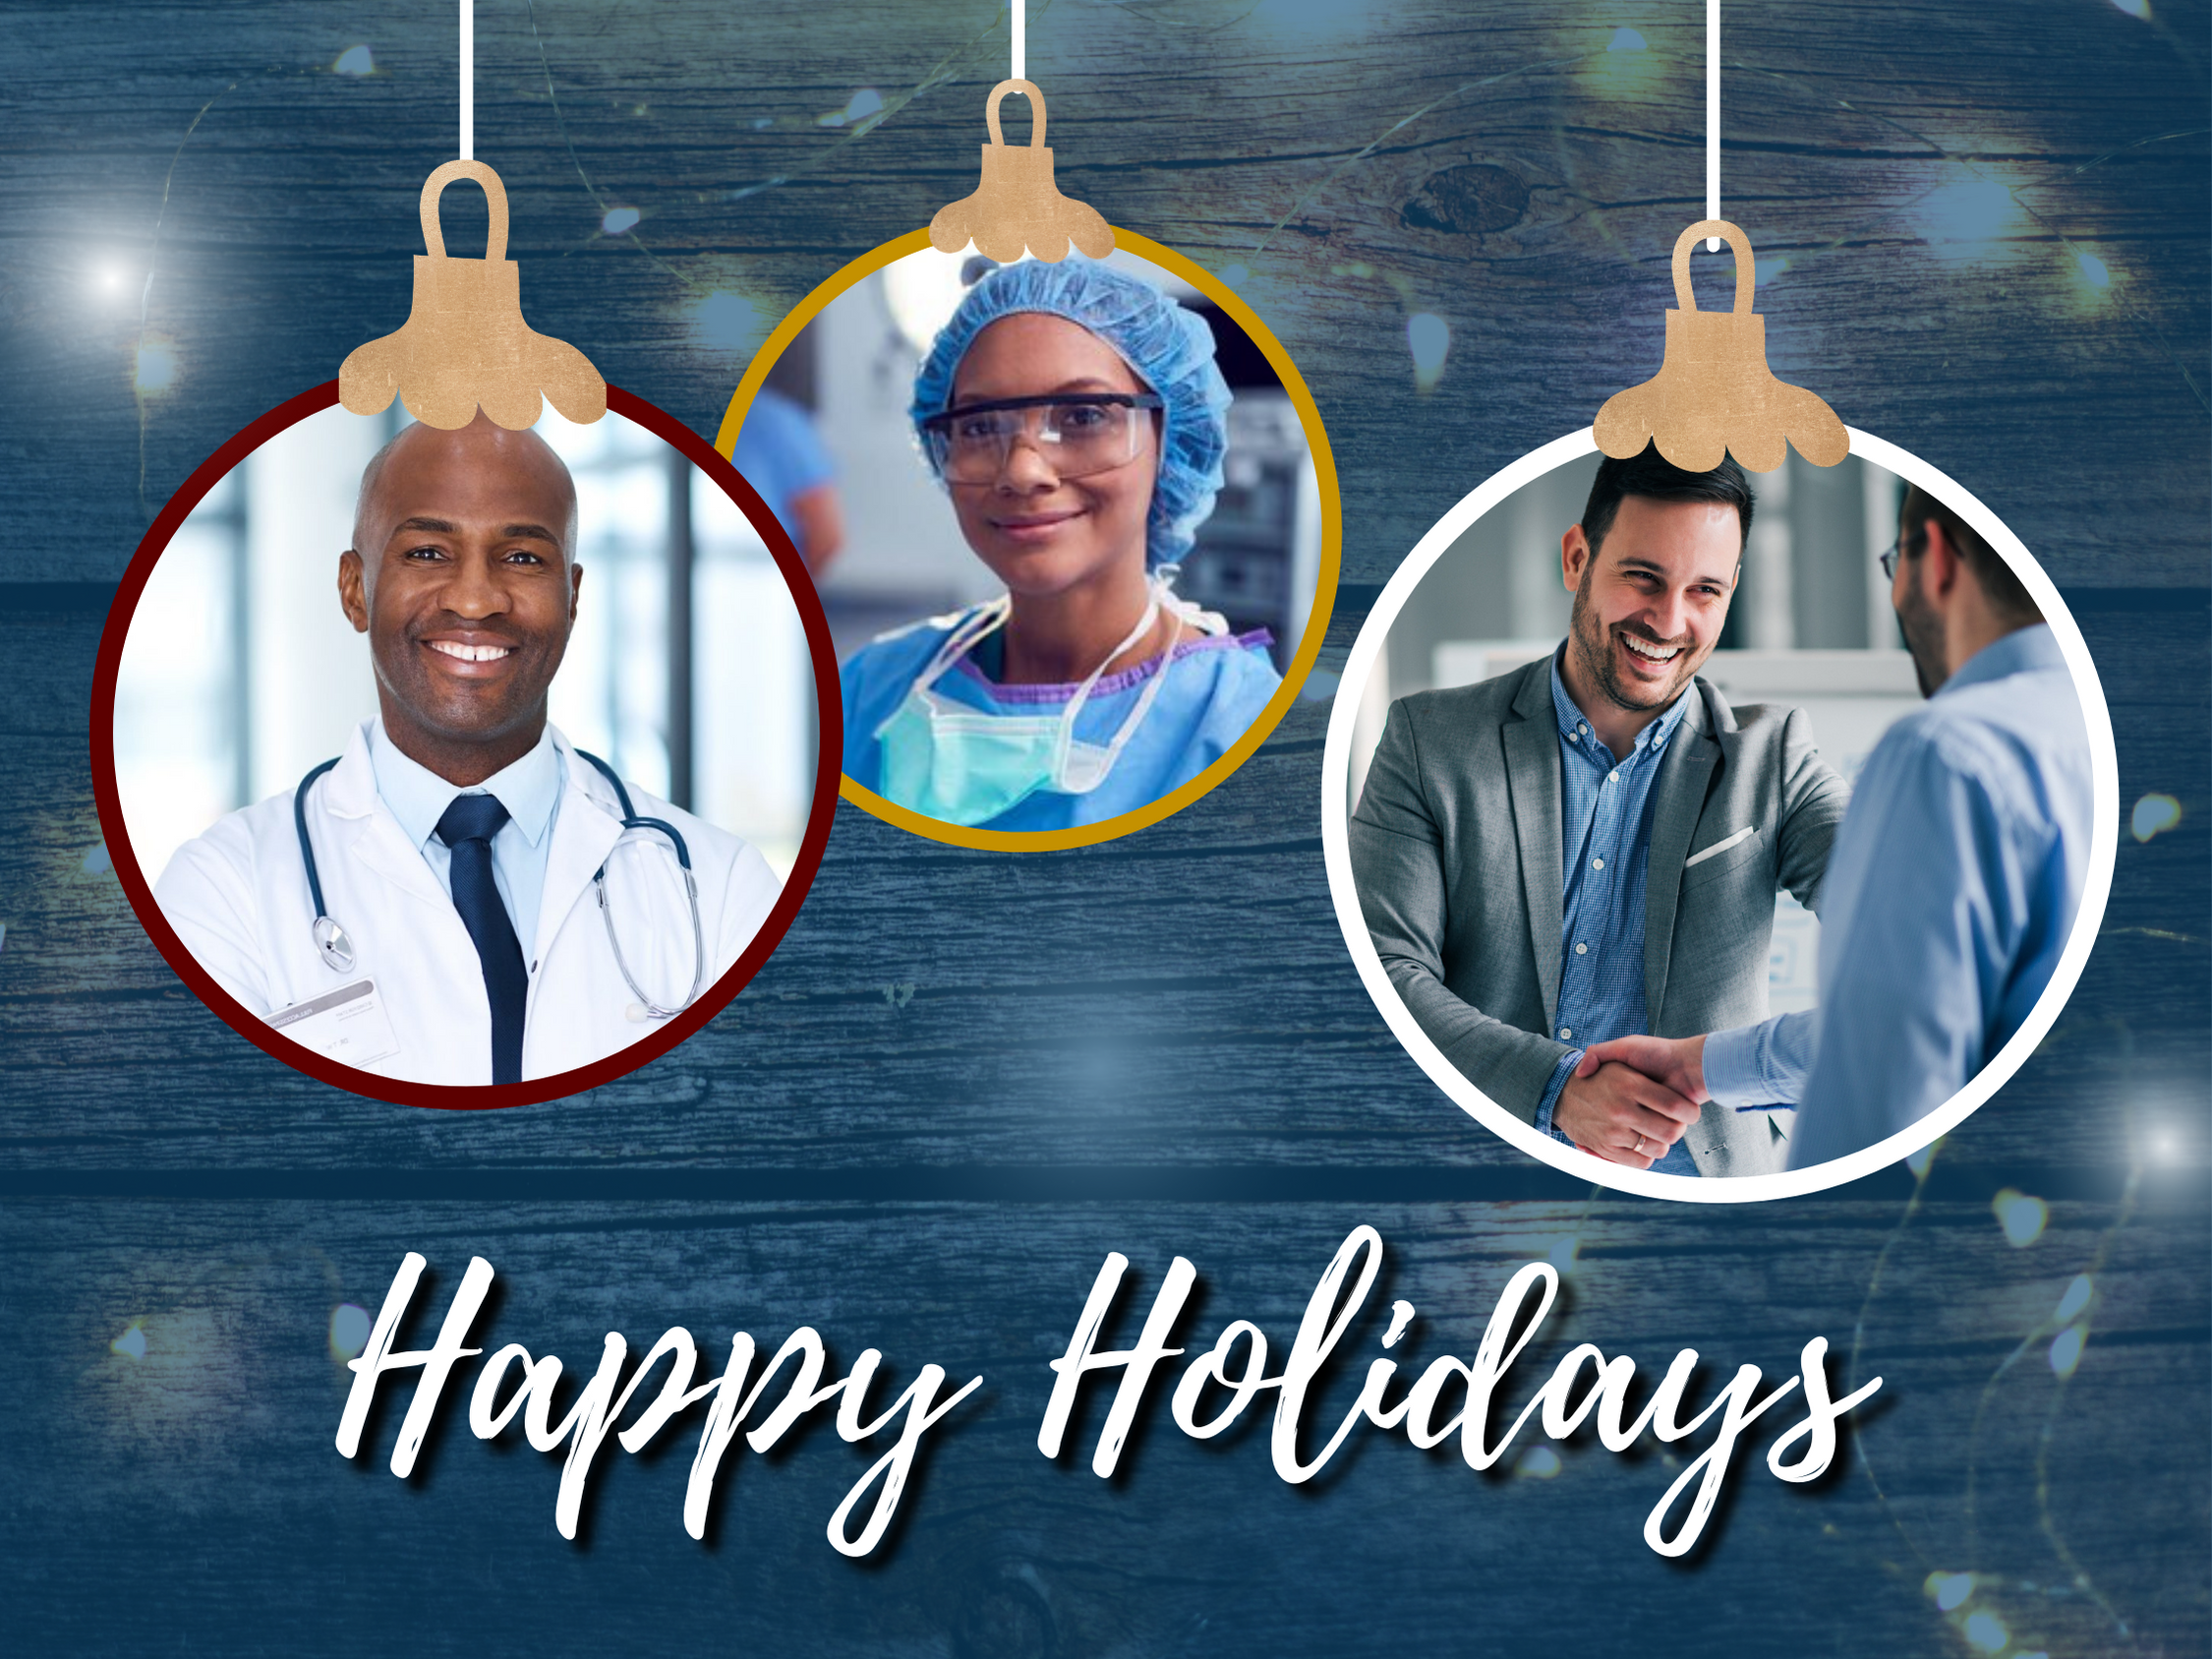 Happy Holidays from the Western Healthcare Family to Yours!